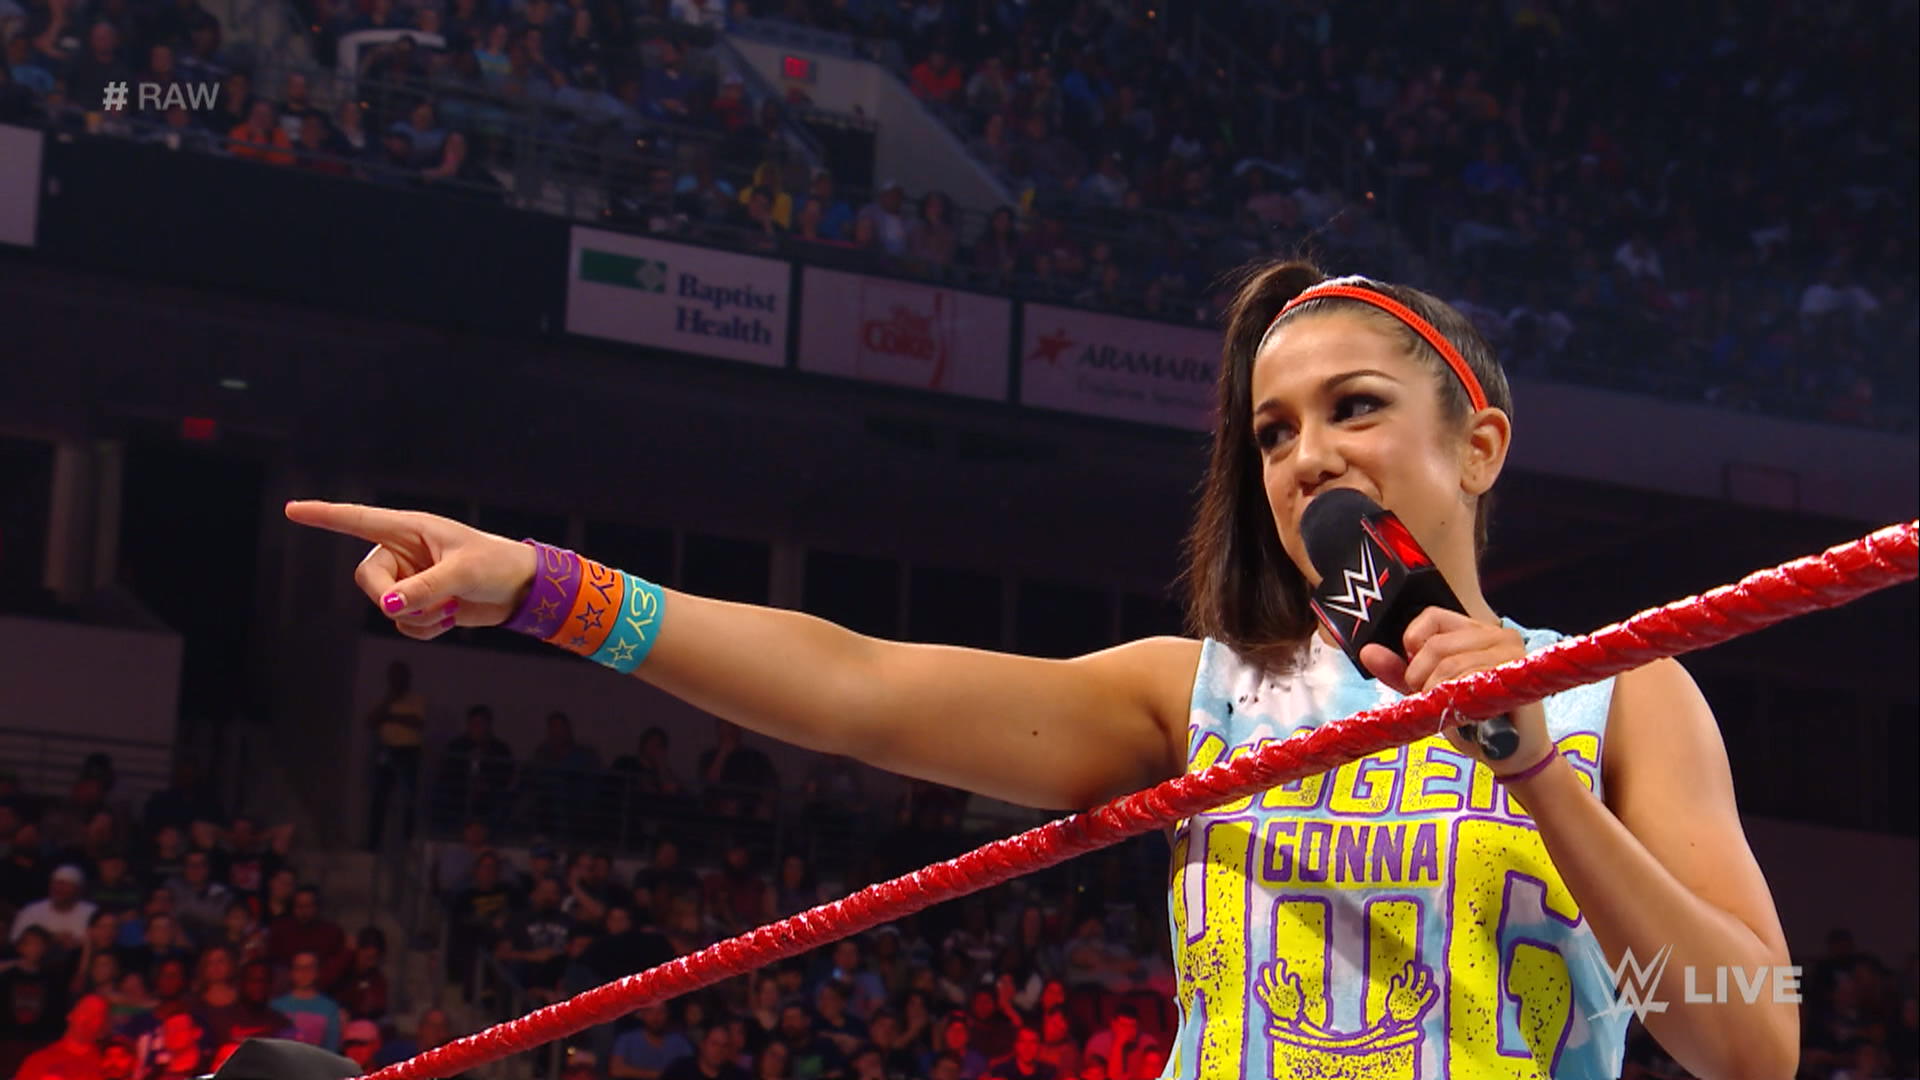 Wwe Diva Bayley Wallpaper Beautiful Image HD Pictures